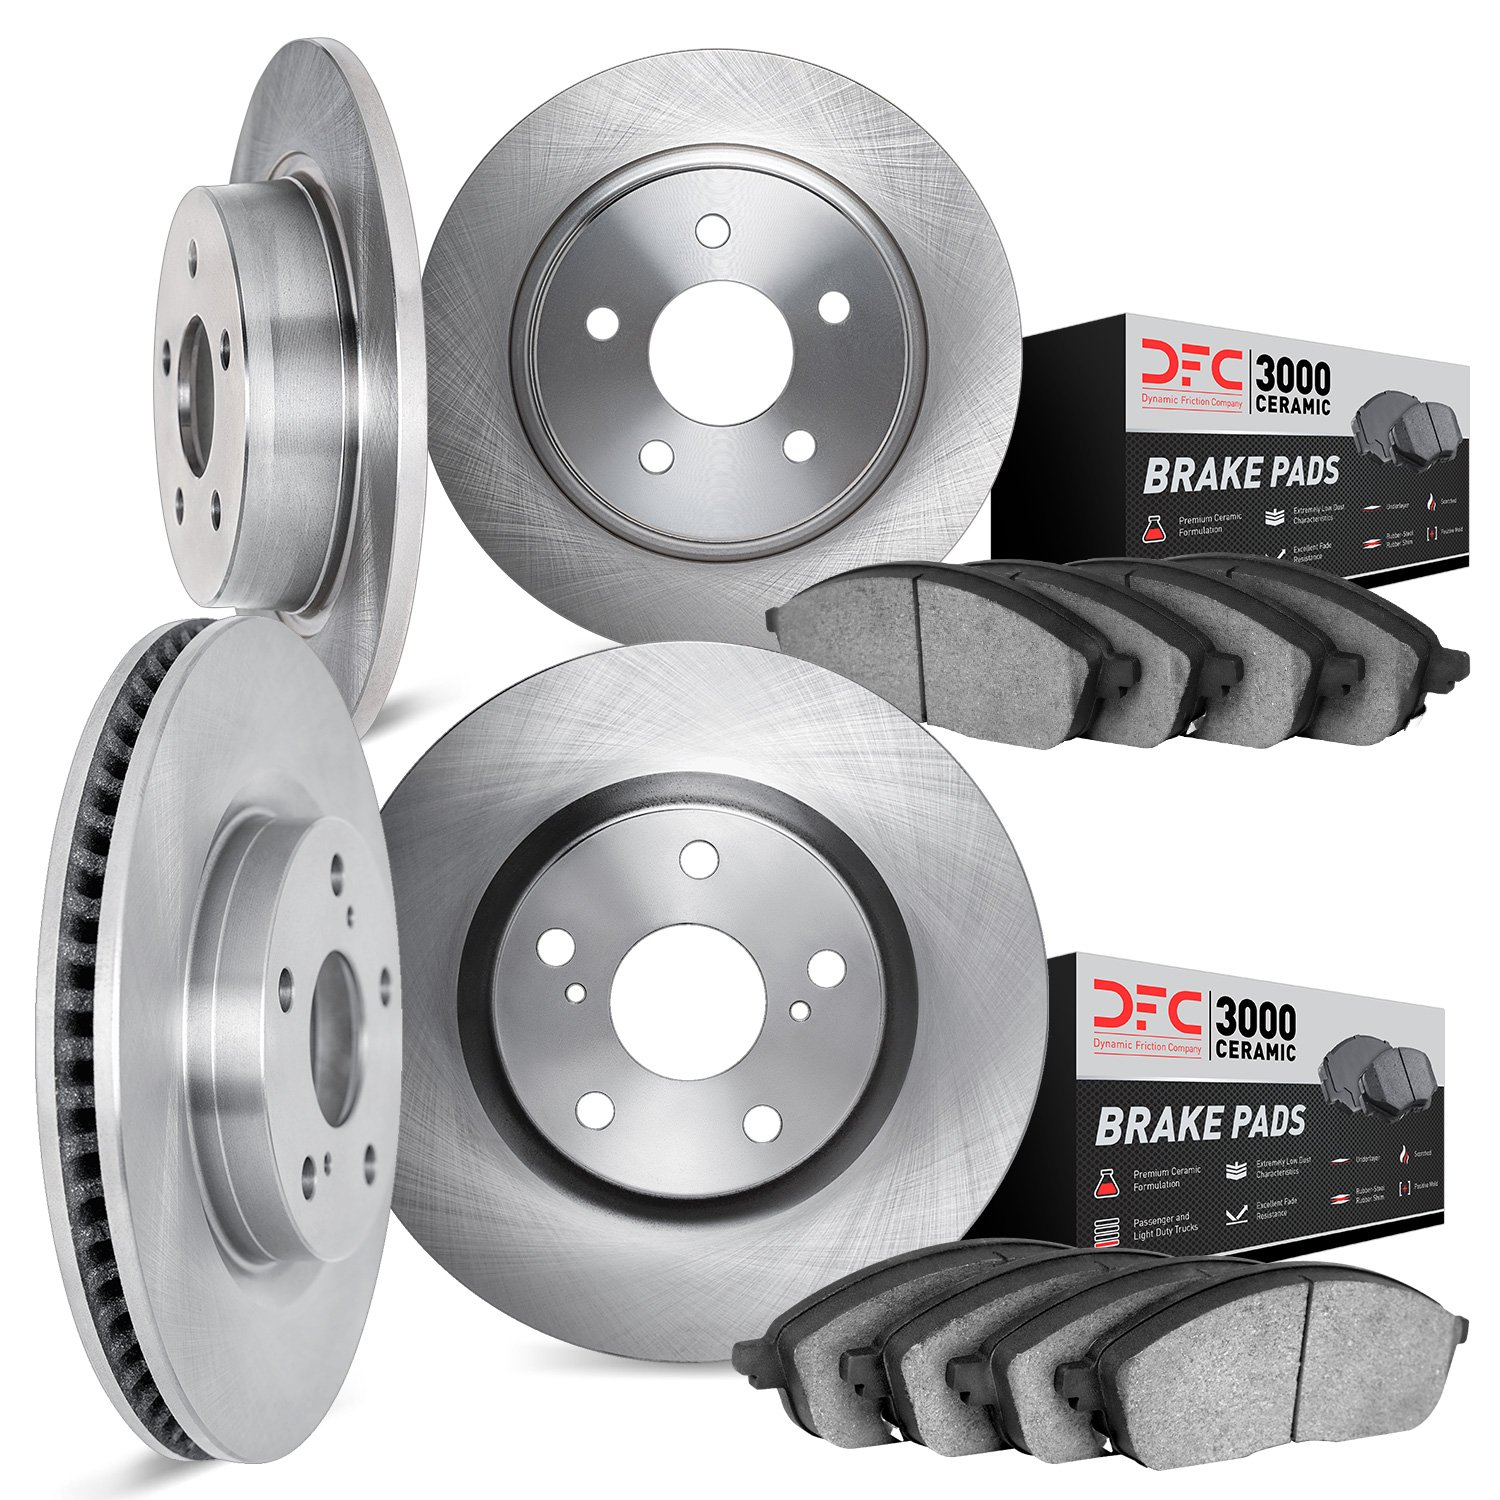 6304-76053 Brake Rotors with 3000-Series Ceramic Brake Pads Kit, 2002-2006 Lexus/Toyota/Scion, Position: Front and Rear